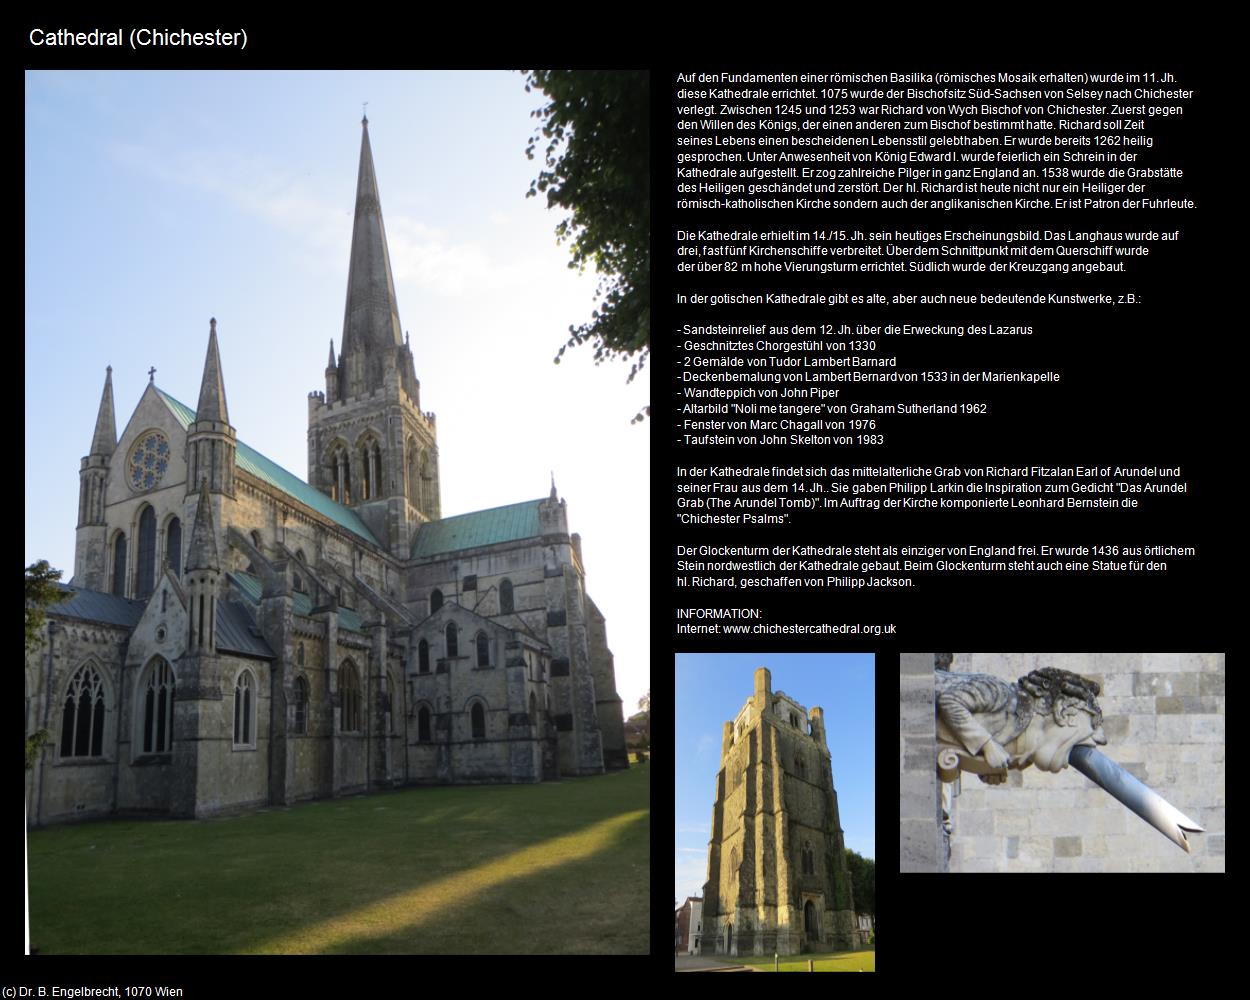 Cathedral (Chichester, England) in Kulturatlas-ENGLAND und WALES